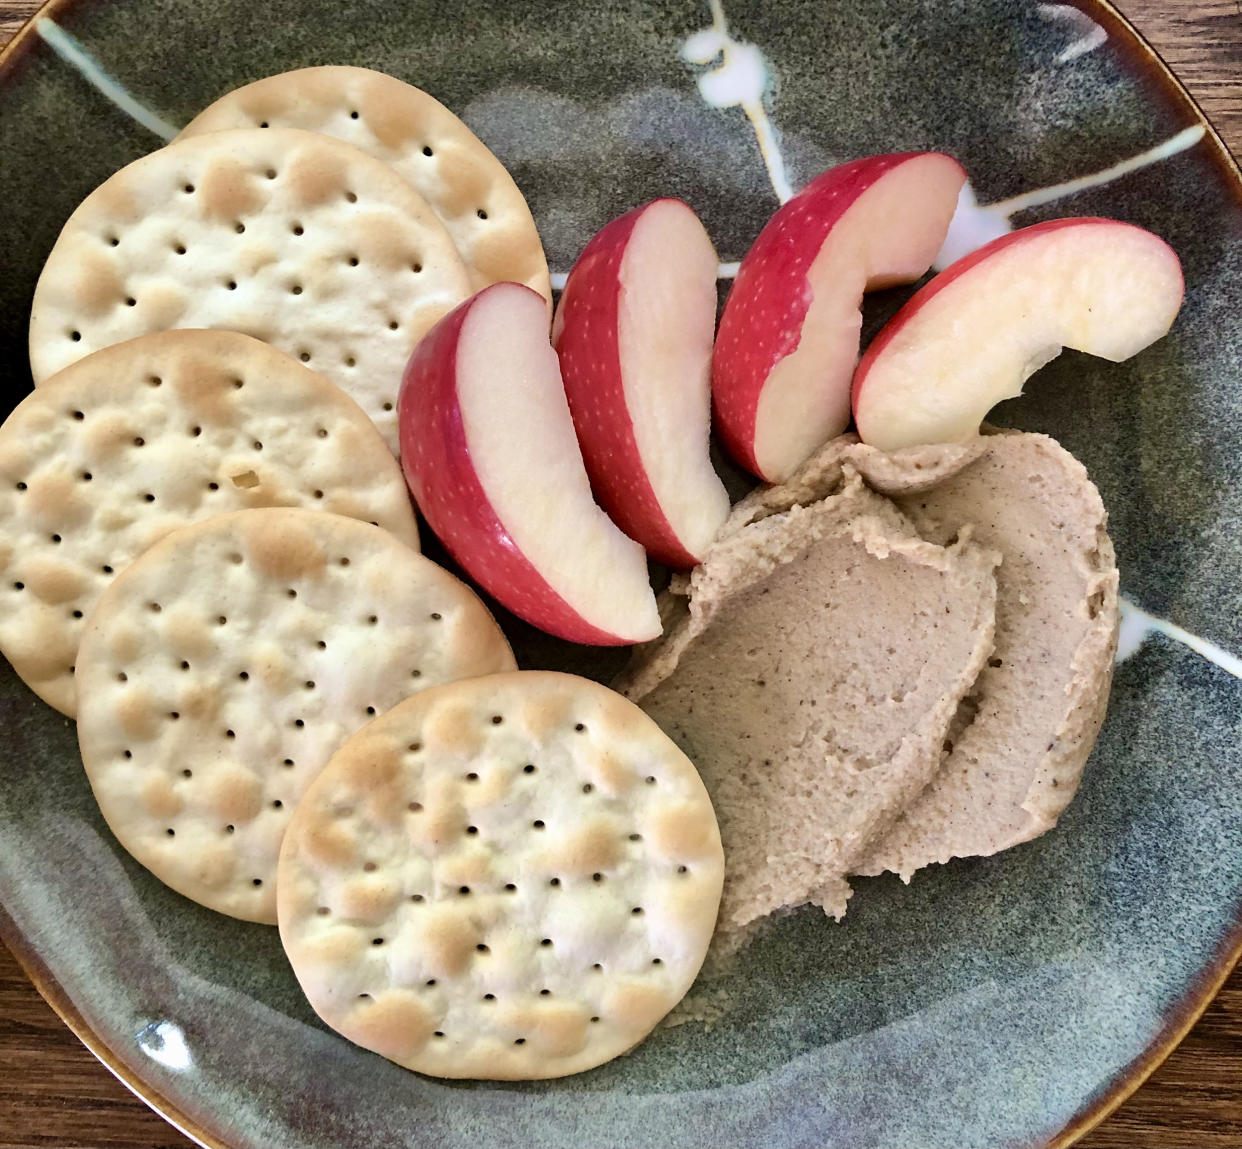 Pairing dessert hummus with other nutritious, lower-calorie components makes for balanced snacking. (Heather Martin)